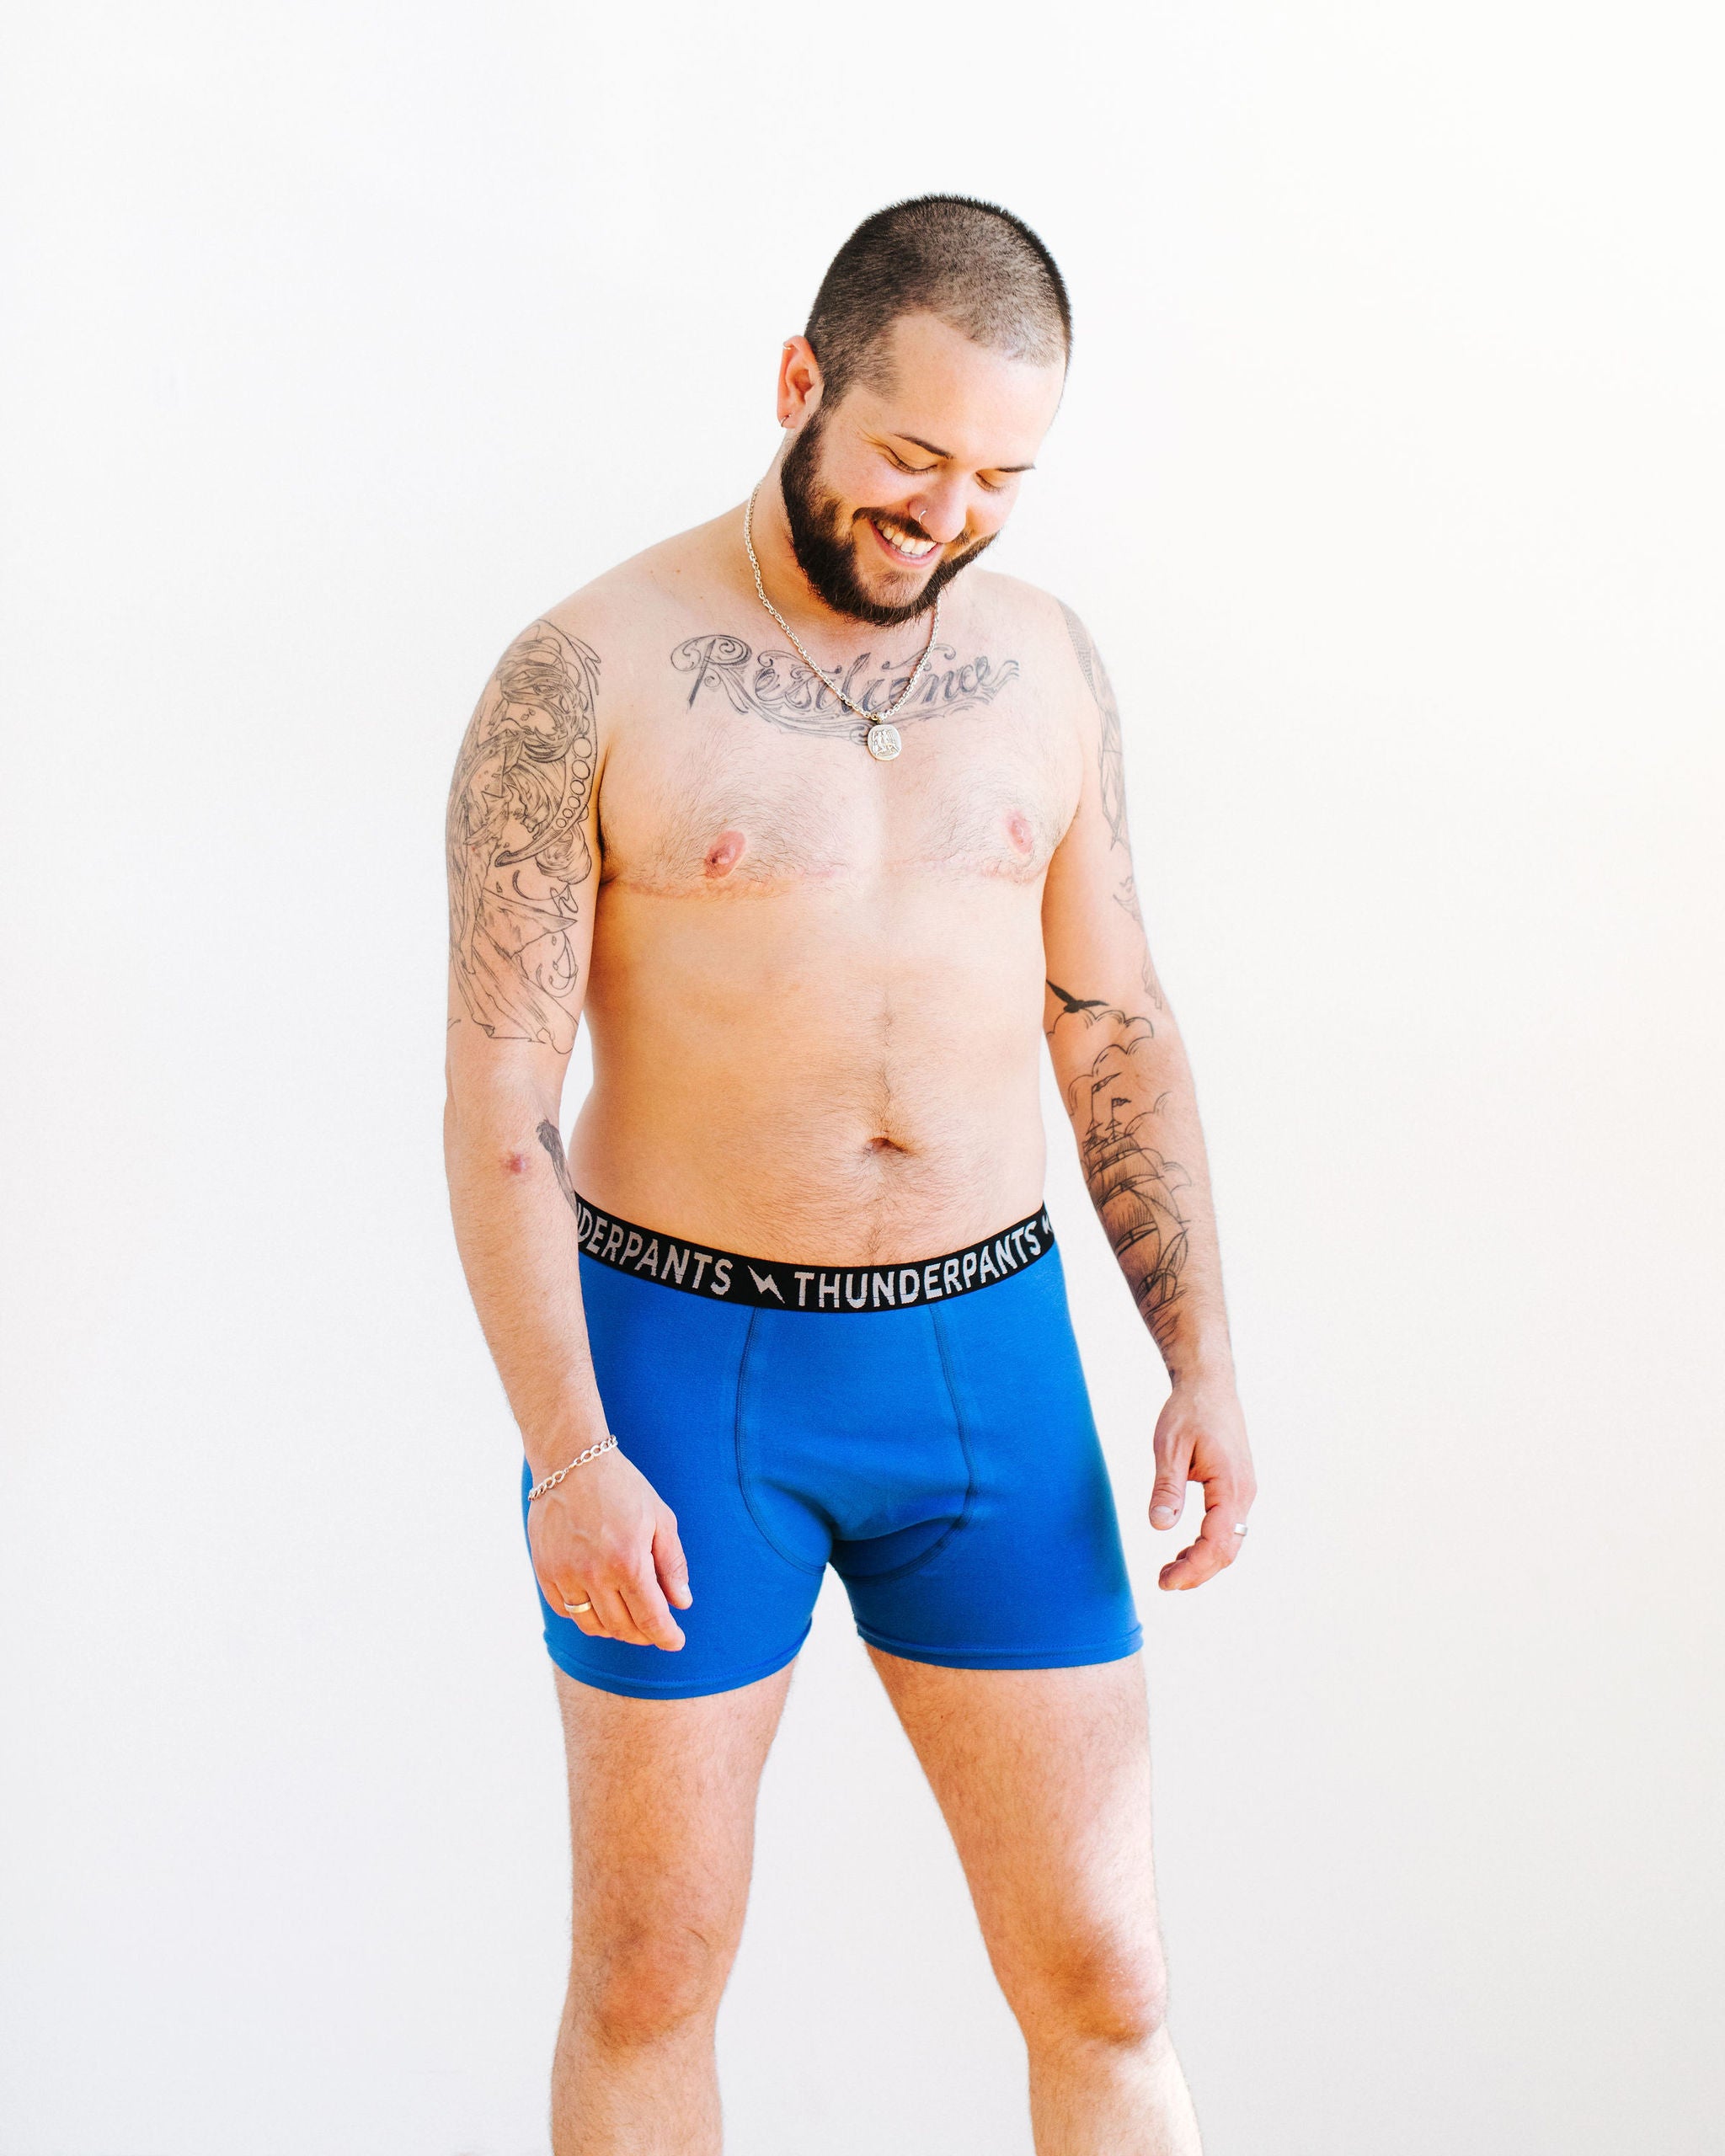 Model wearing Thunderpants Boxer Brief style underwear in Blueberry Blue.